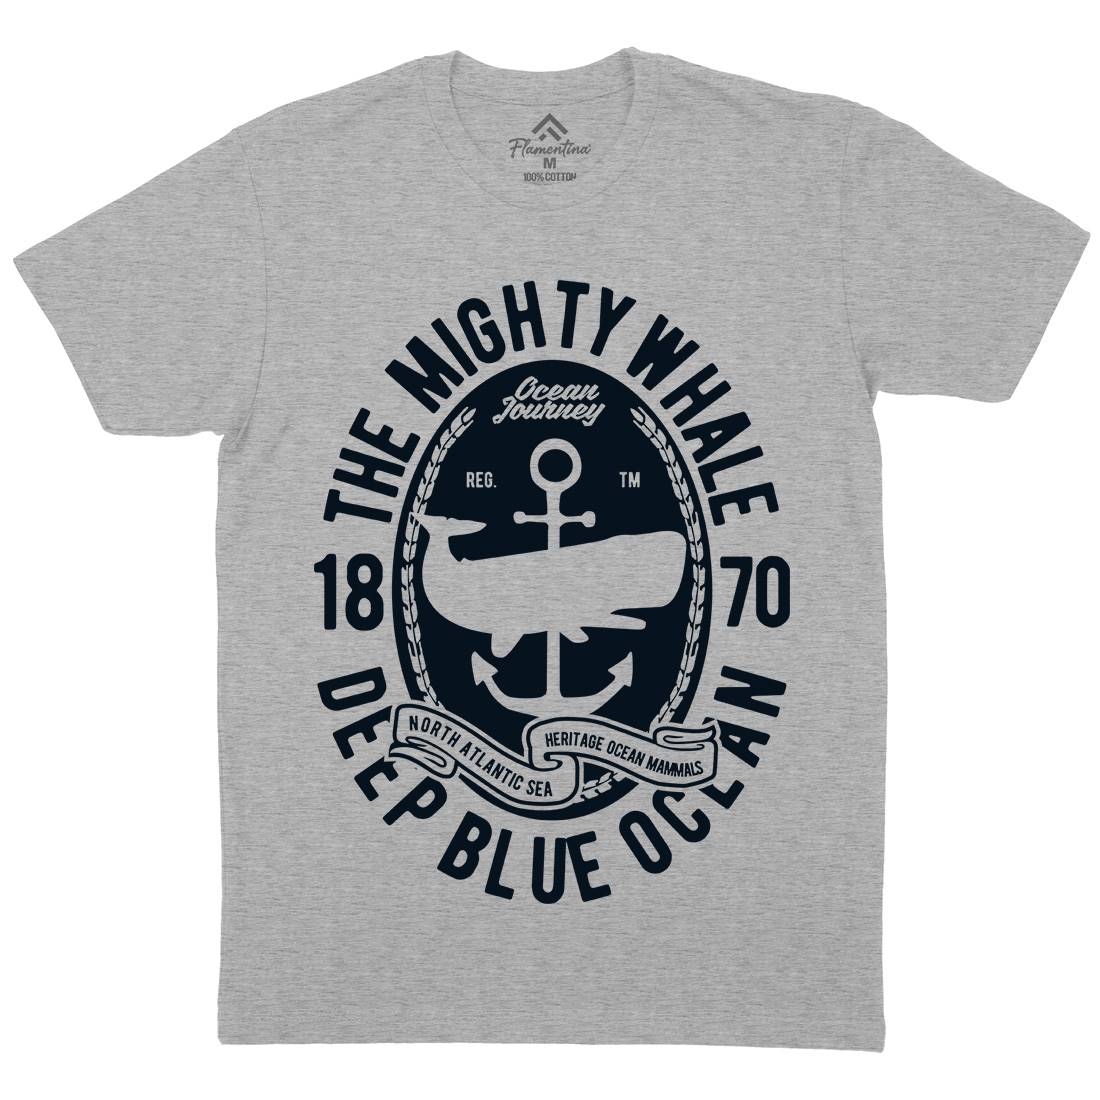 The Mighty Whale Mens Organic Crew Neck T-Shirt Navy B466